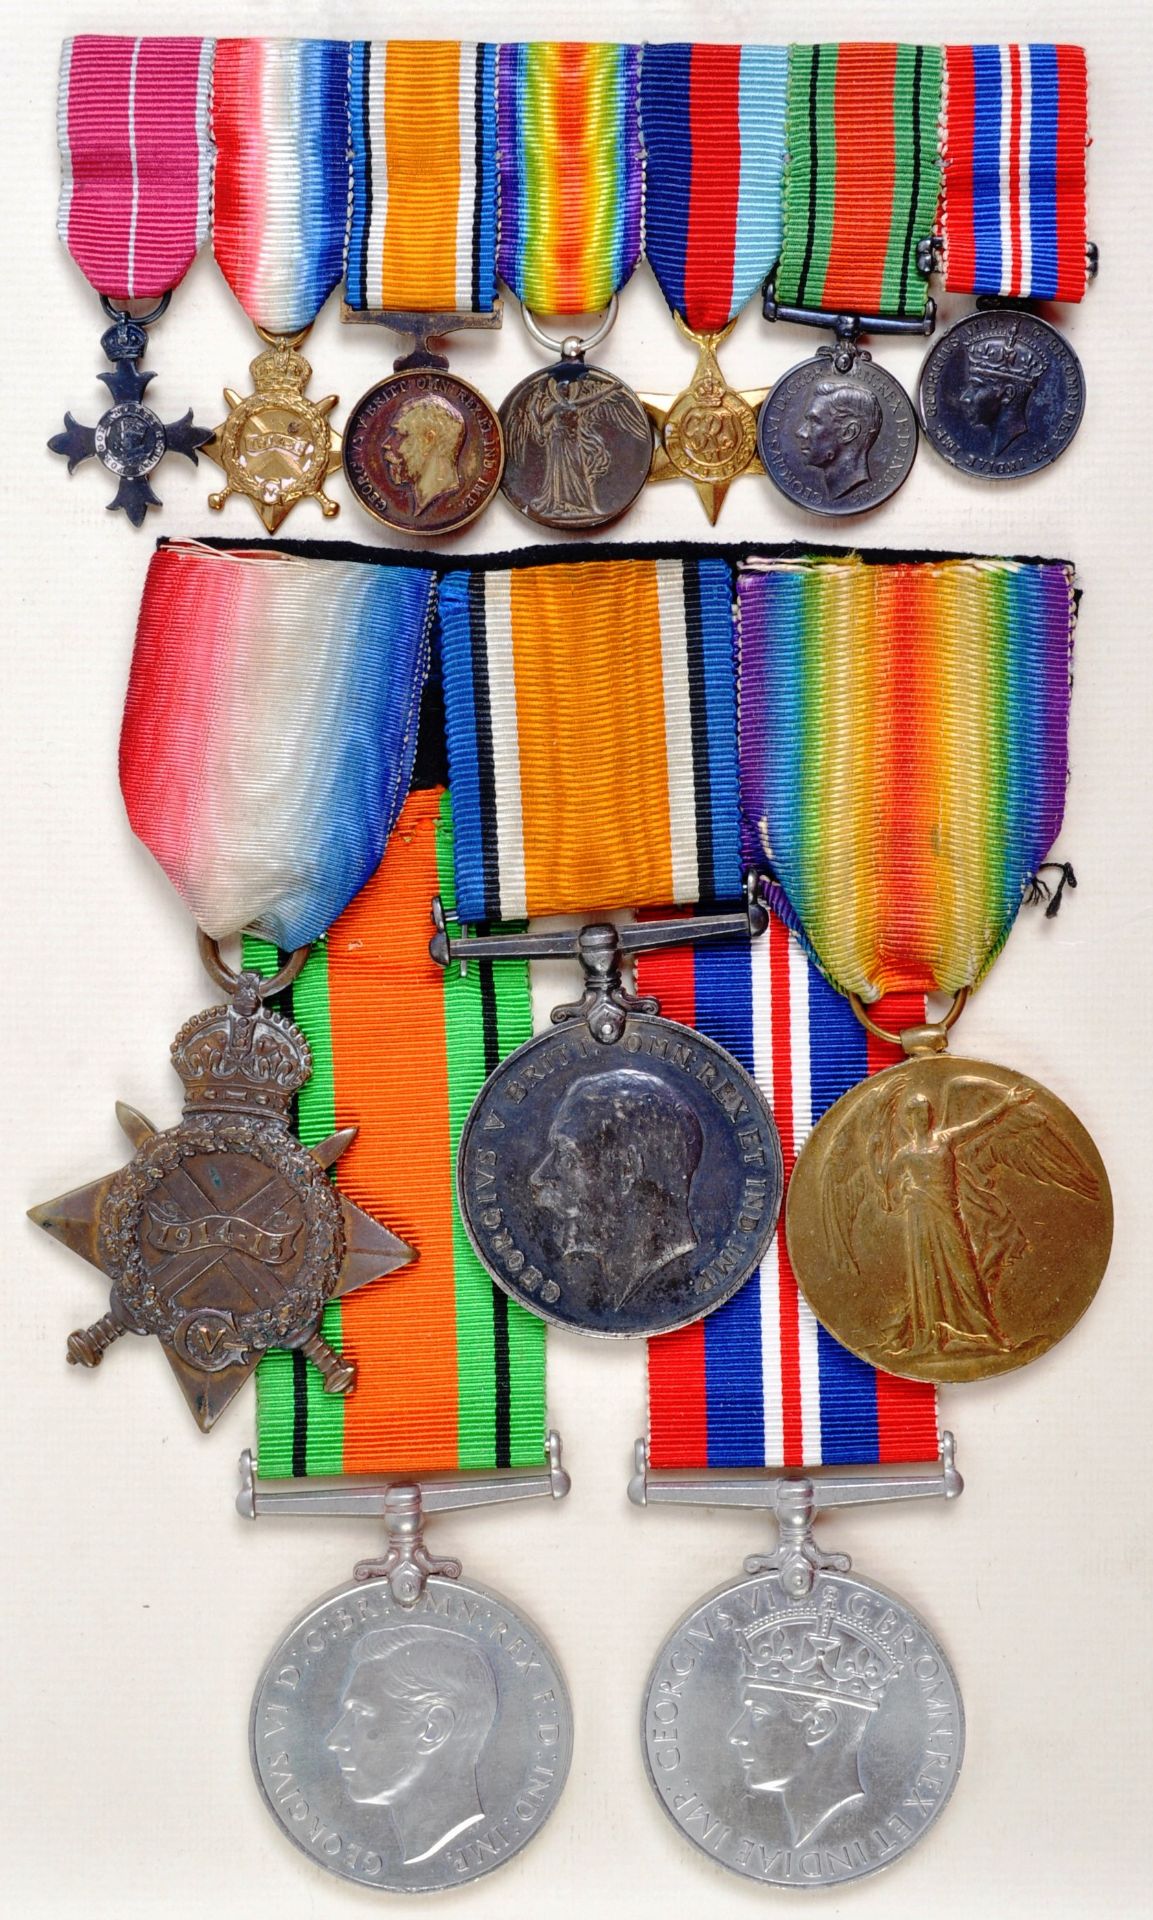 WWI & WWII SECOND WORLD WAR MEDAL GROUP - ROYAL NAVY